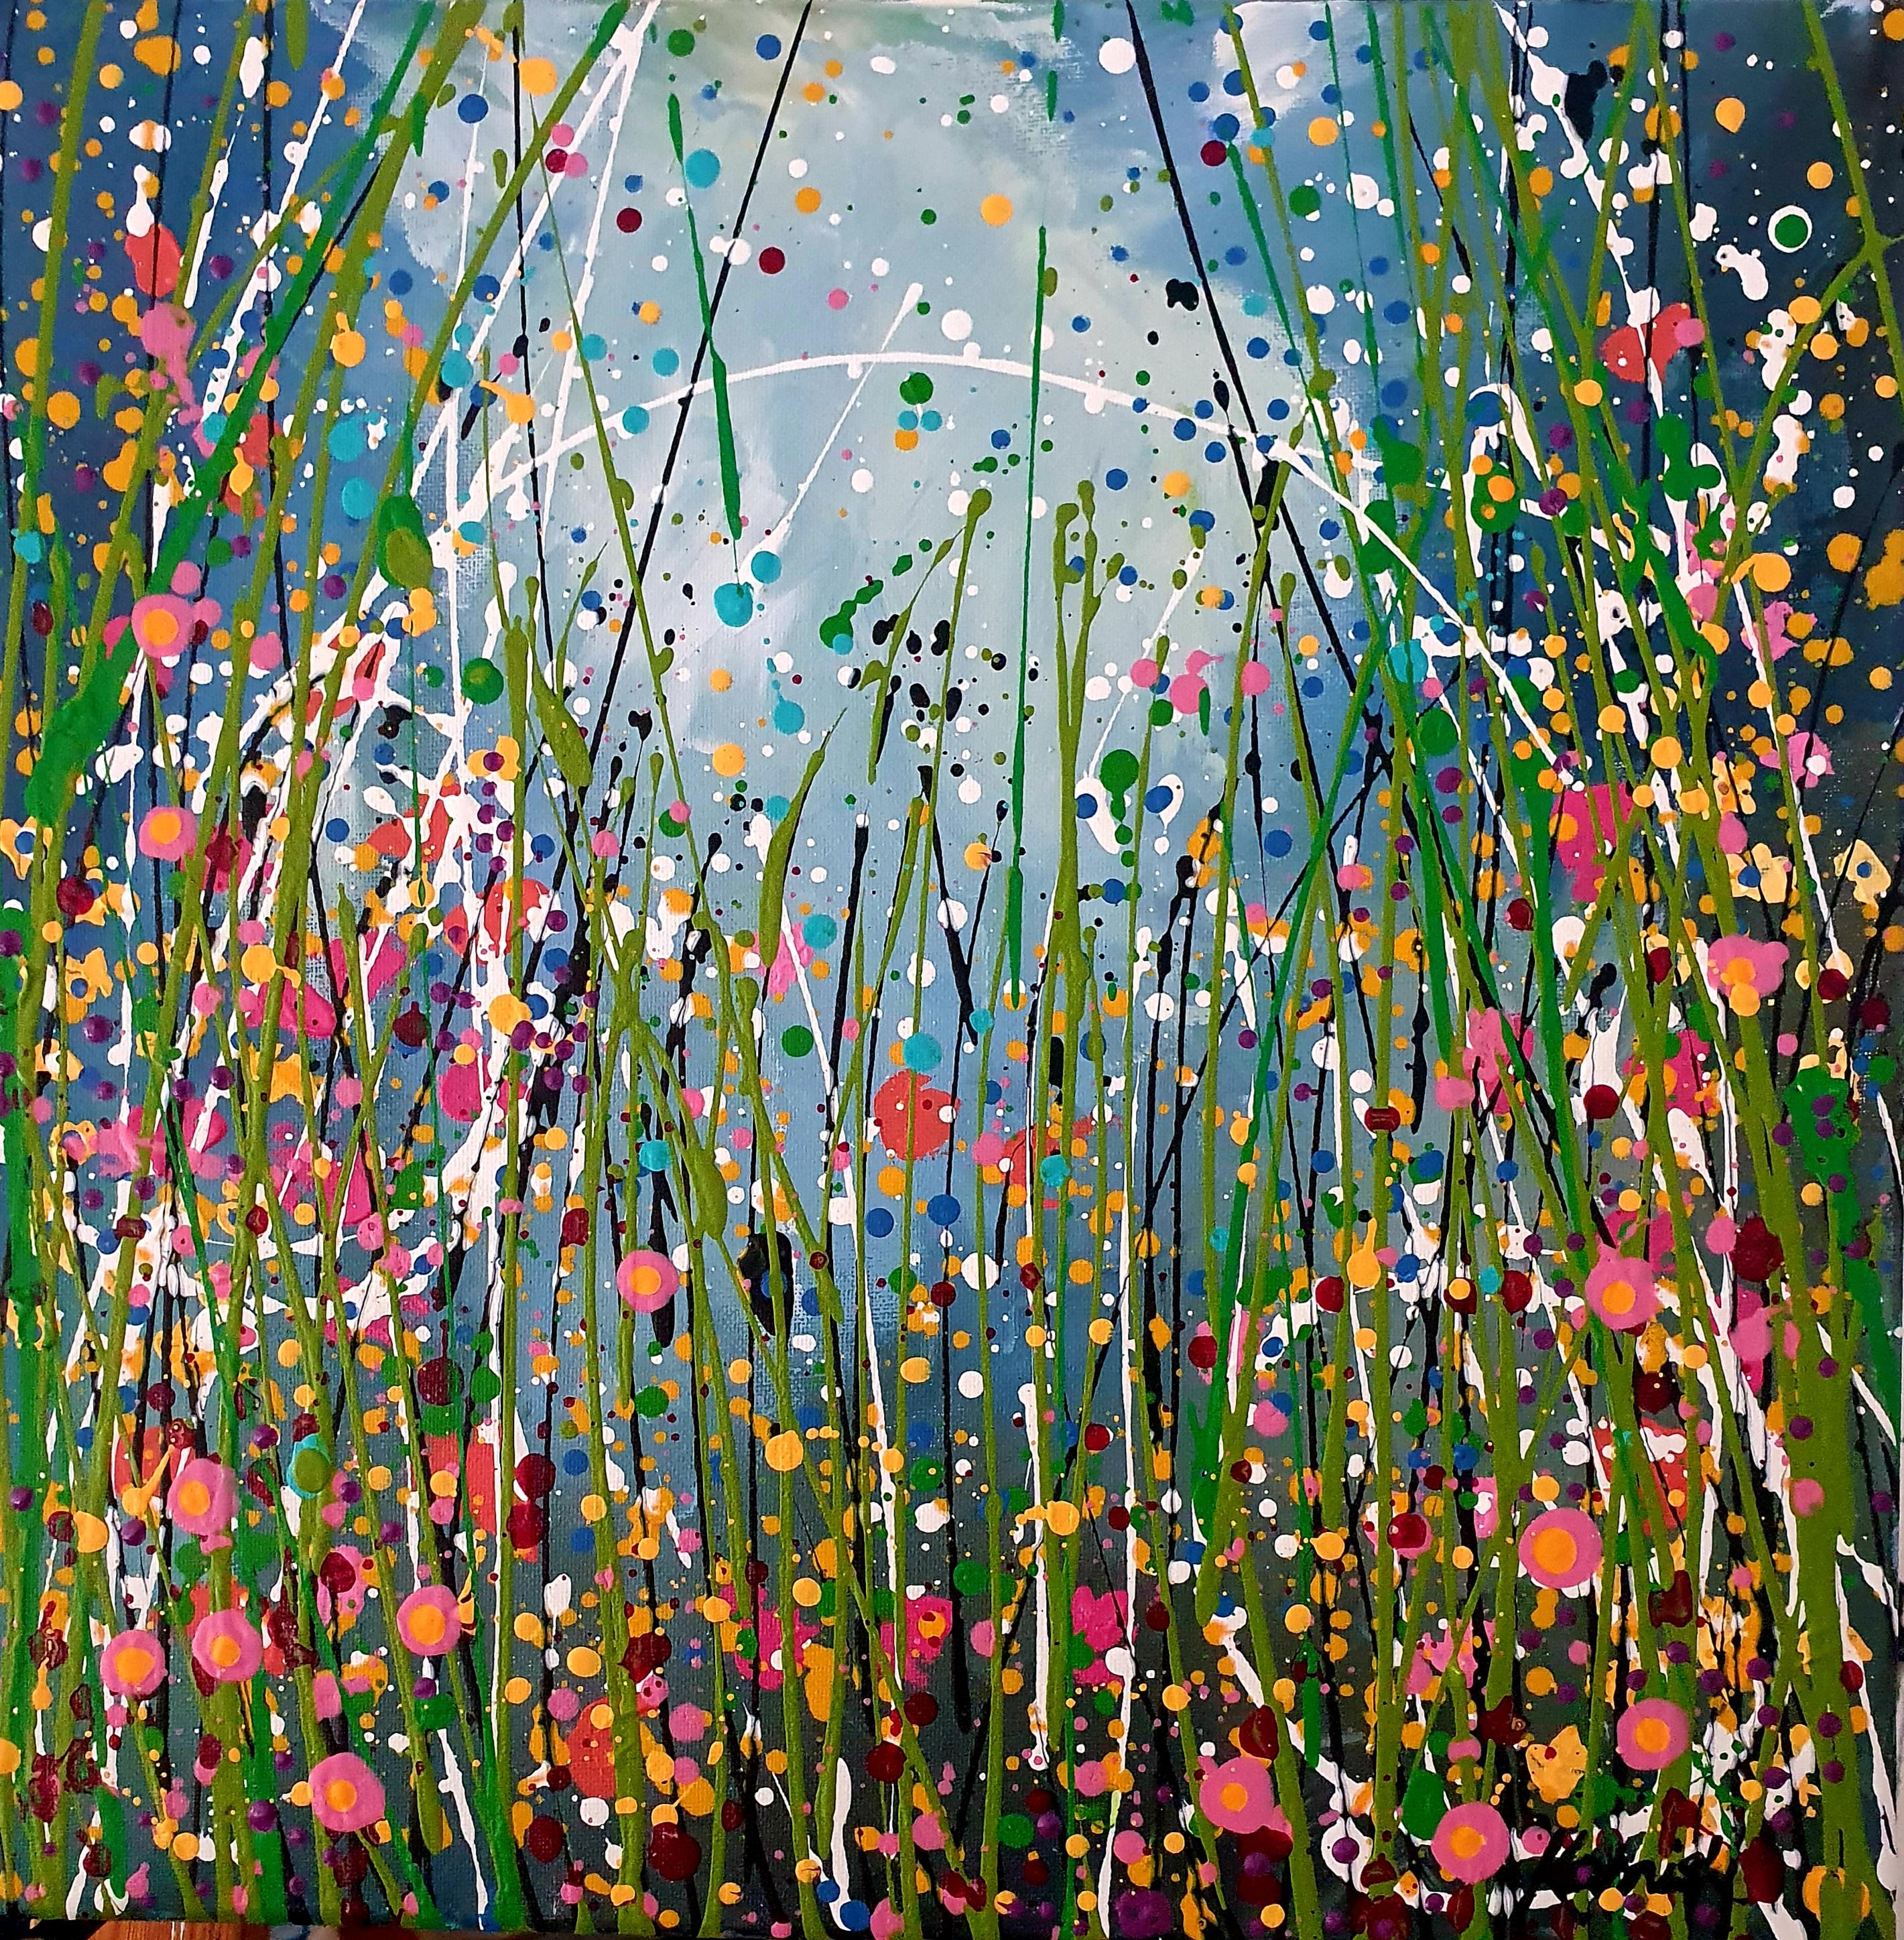 Karnish Art Abstract Painting - Enchanted - Gateway of Beingness - Floral Celebration Focal point Joy Meadow 